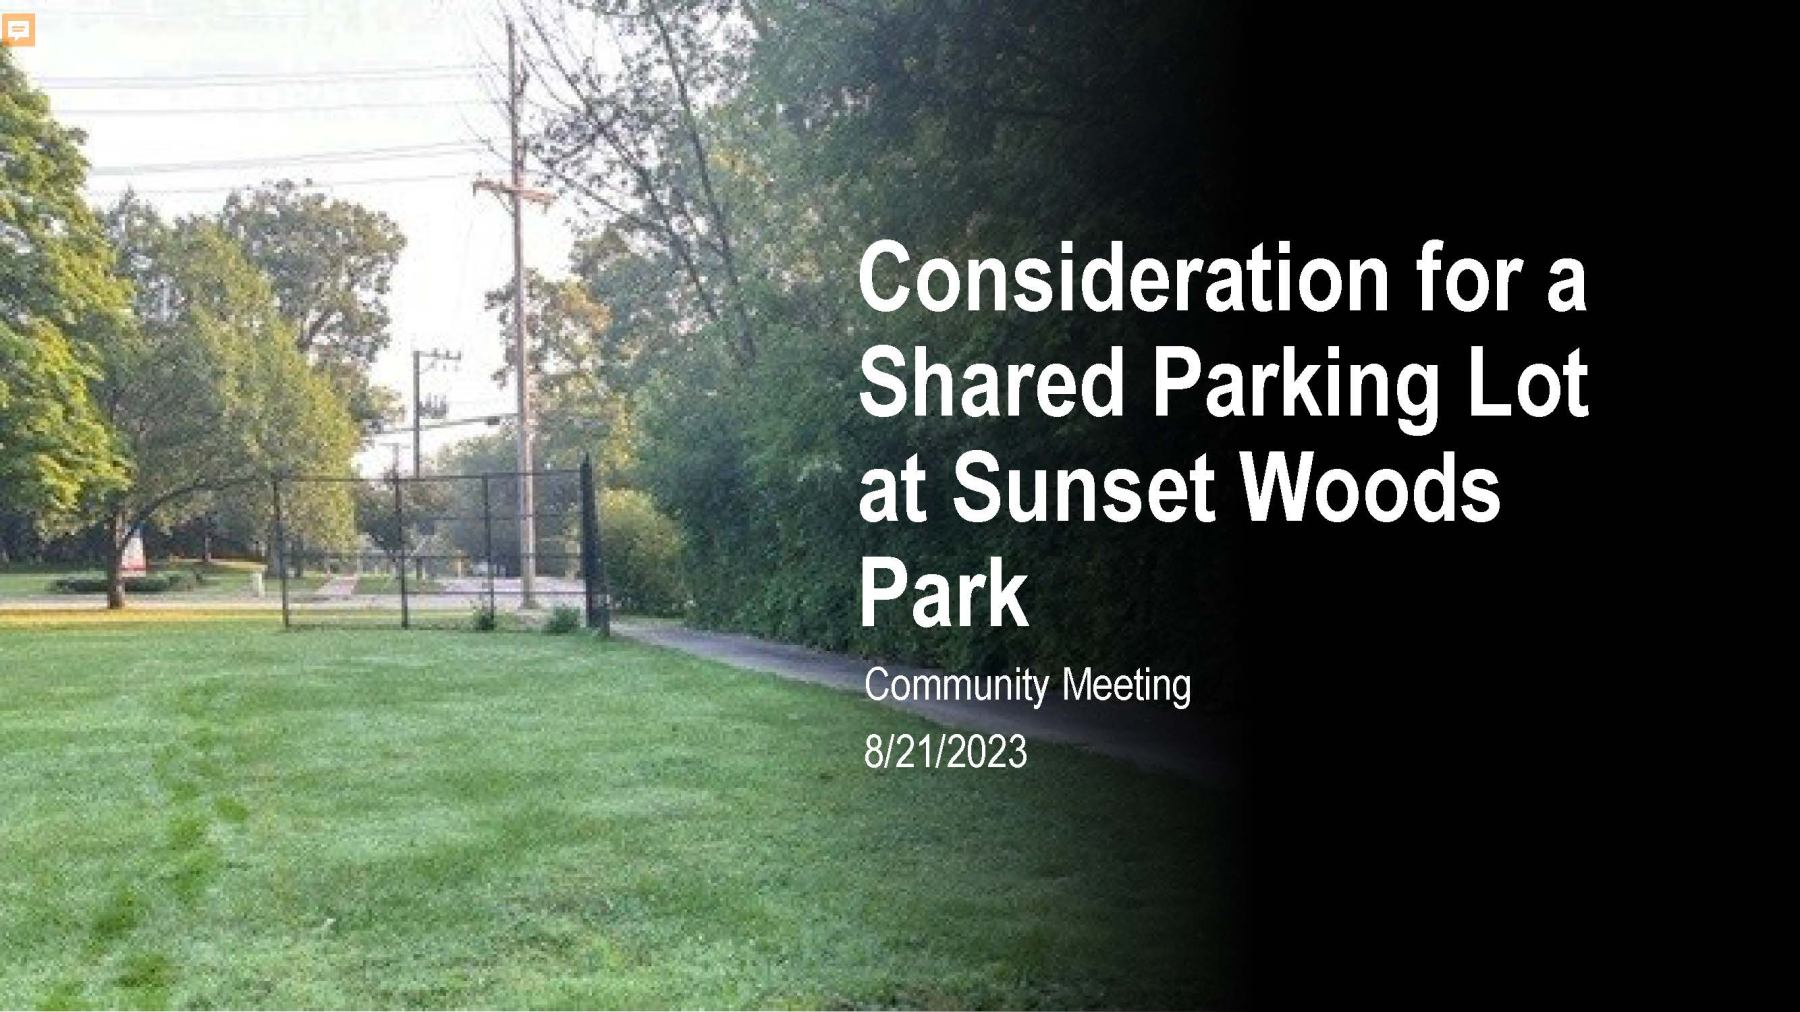 Consideration for a Shared Parking Lot at Sunset Woods Park